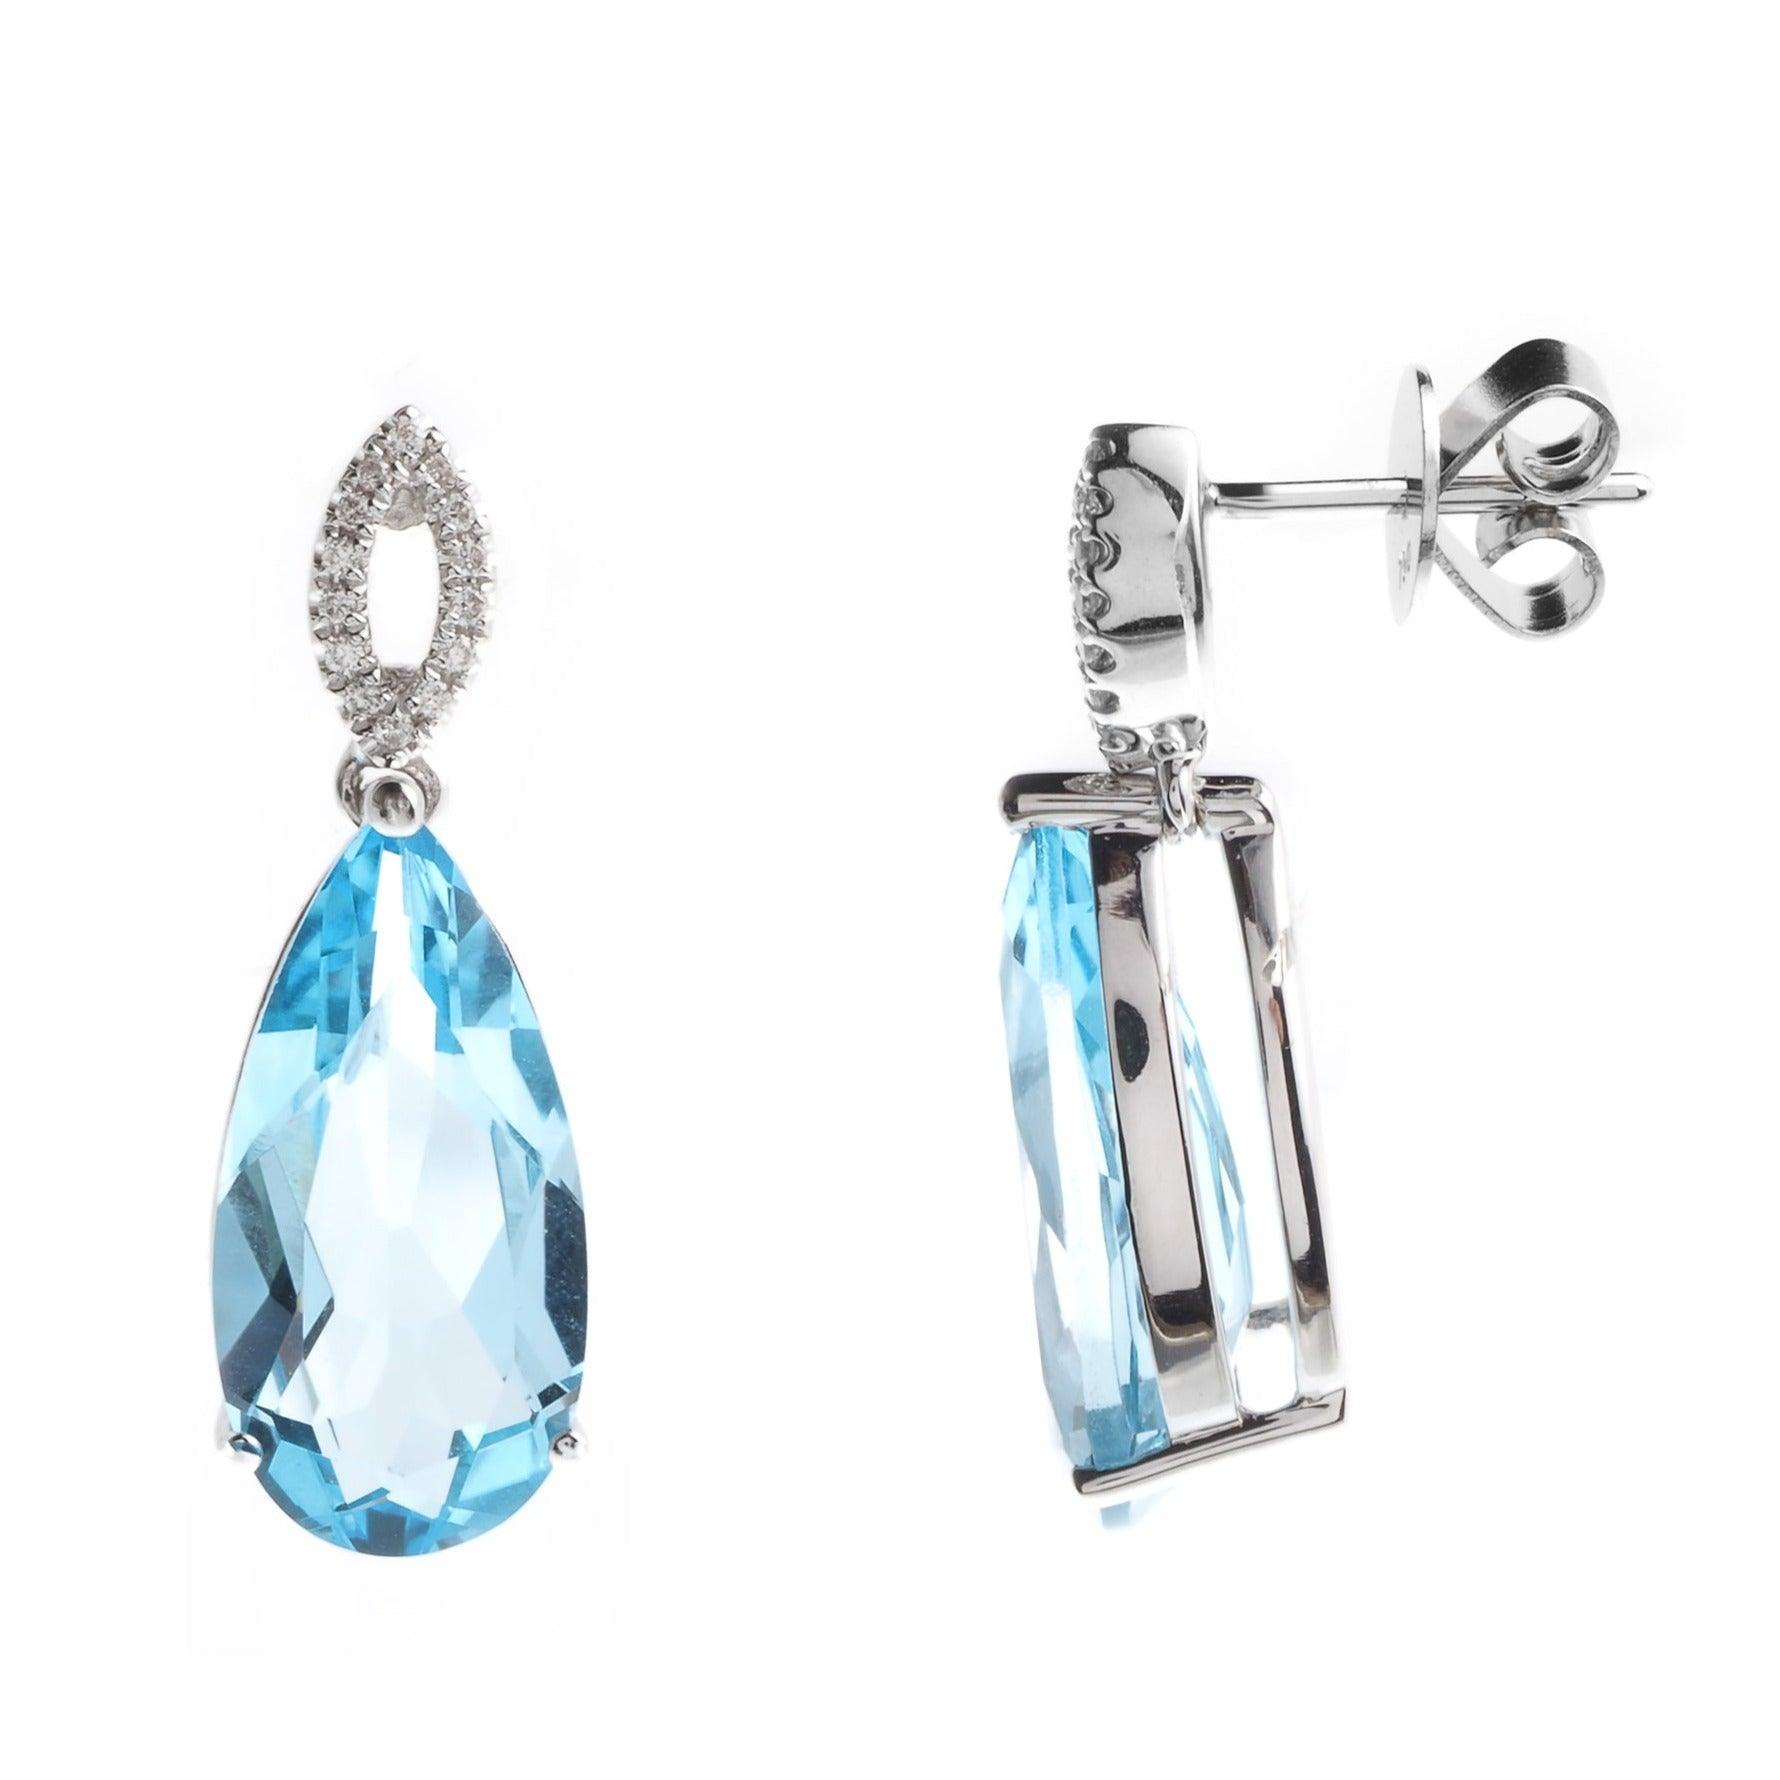 18ct White Gold Diamond and Blue Topaz Drop Earrings with push backs E32082-22 - Minar Jewellers